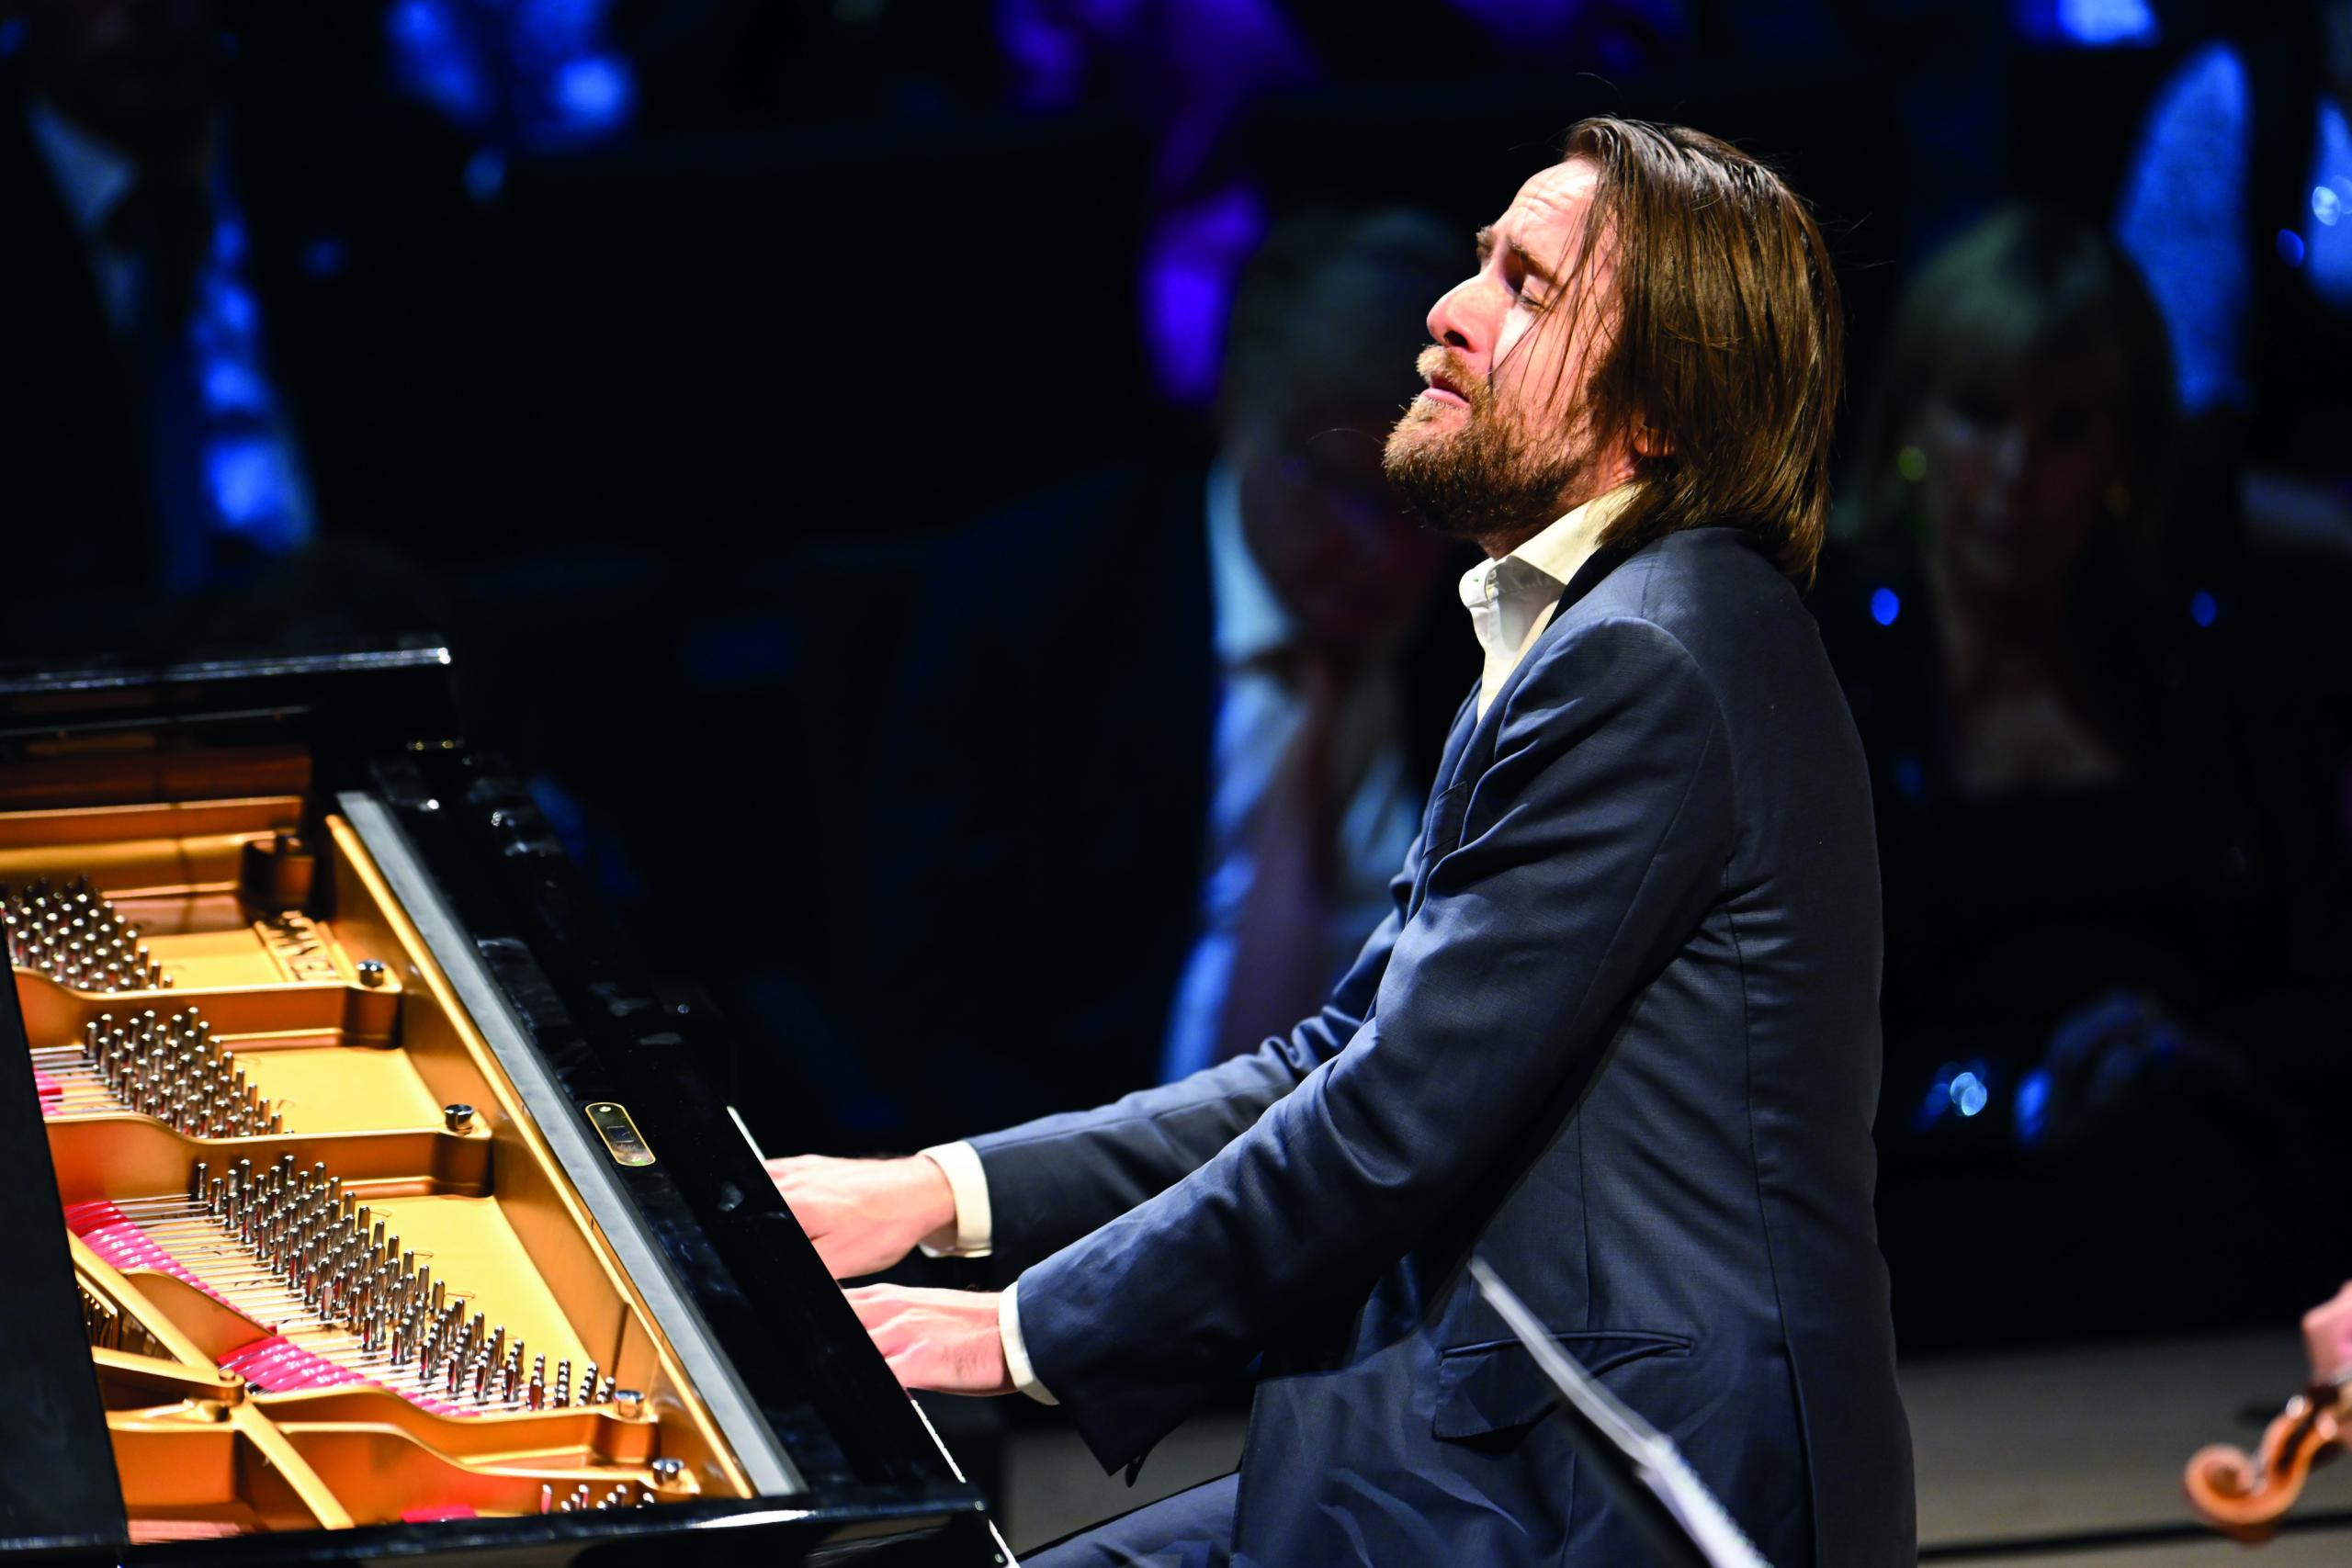 Star pianist Daniil Trifonov at the first concert in the Isarphilharmonie